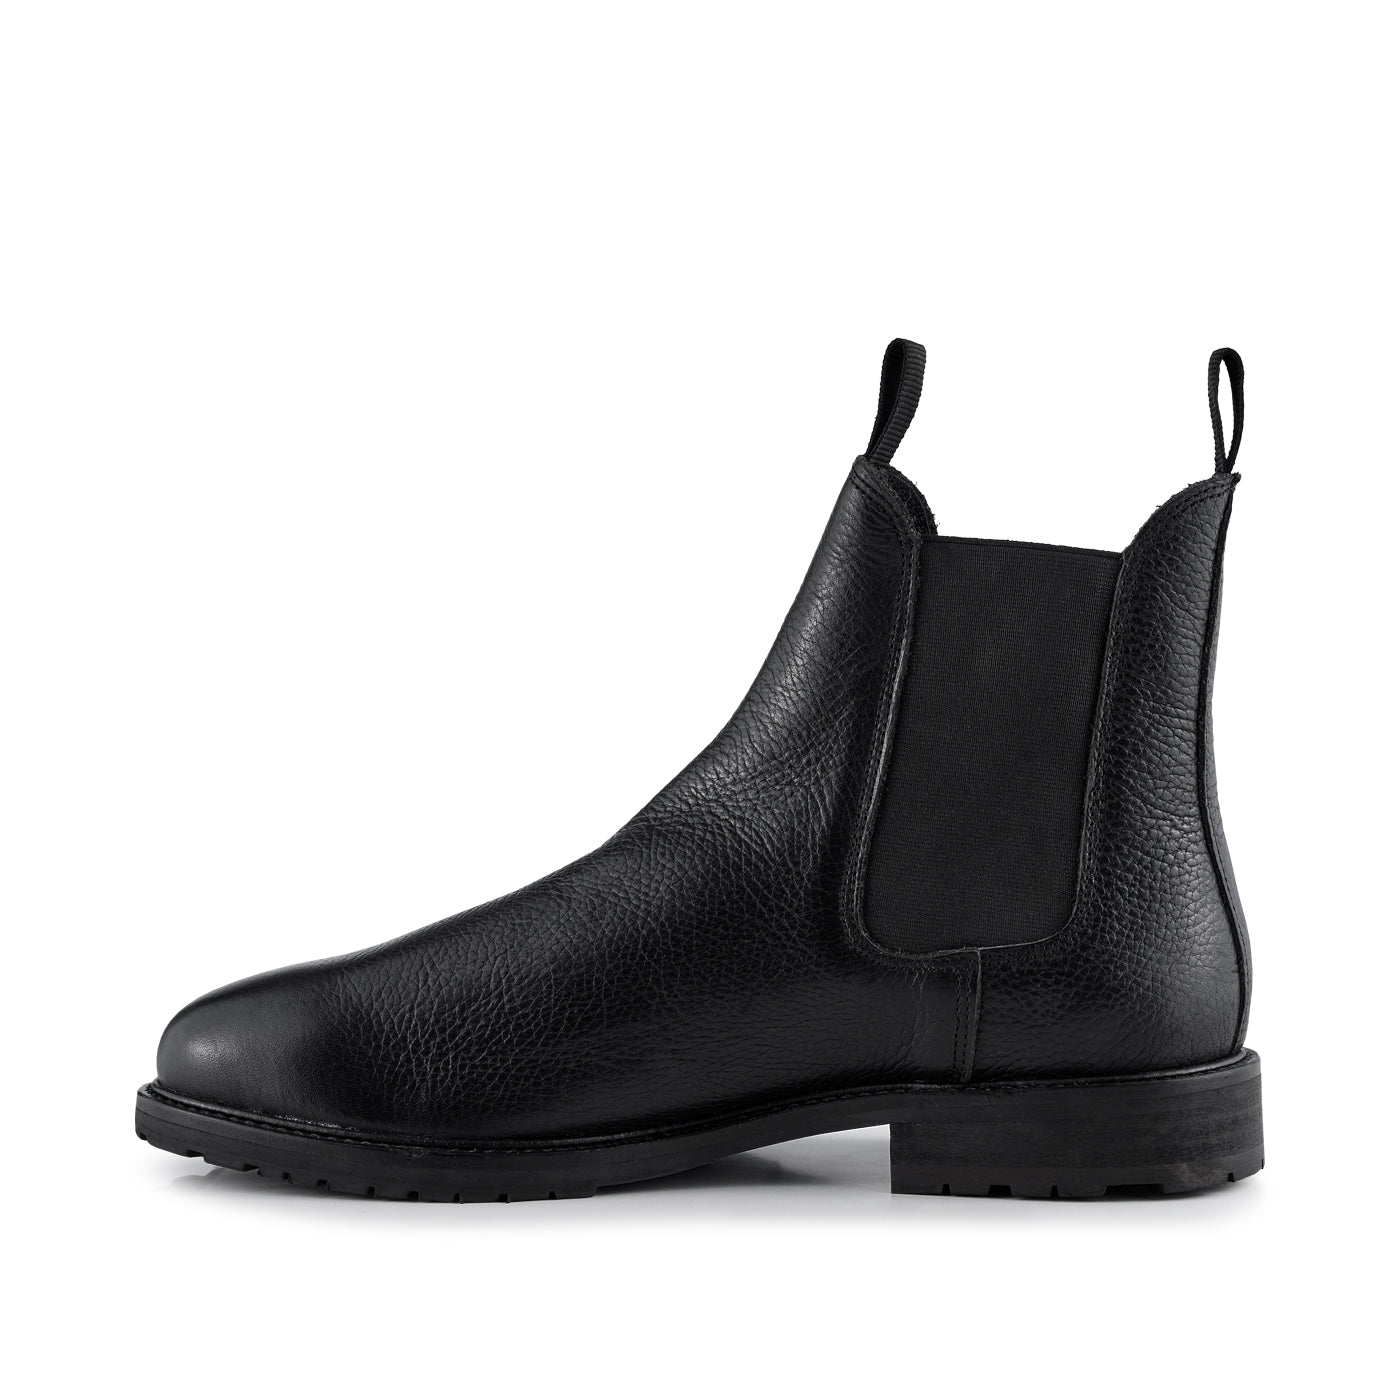 THE CLASSIC BLACK CHELSEA BOOTS